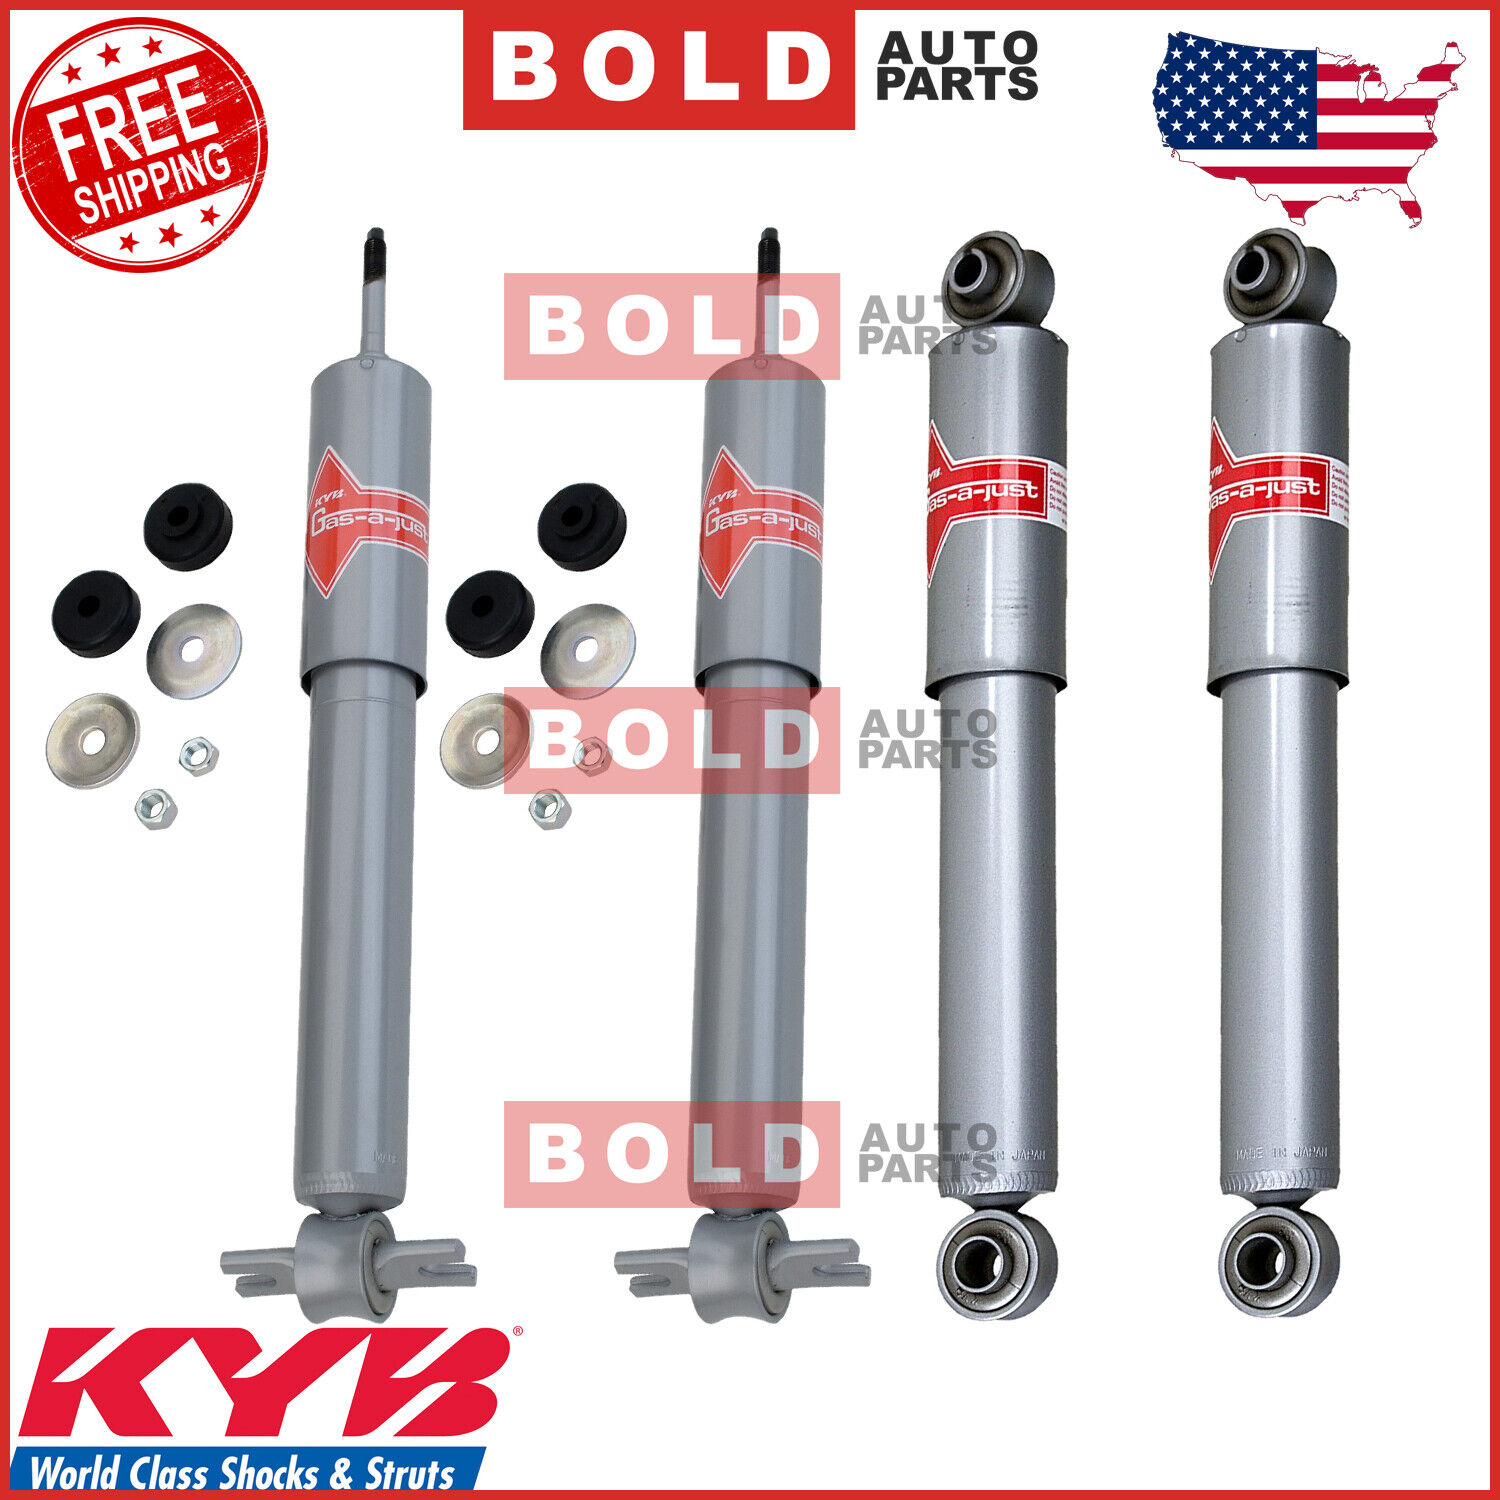 KYB Gas-A-Just Front & Rear Shock Absorbers Kit 4 PCS Set for Chevrolet Corvette